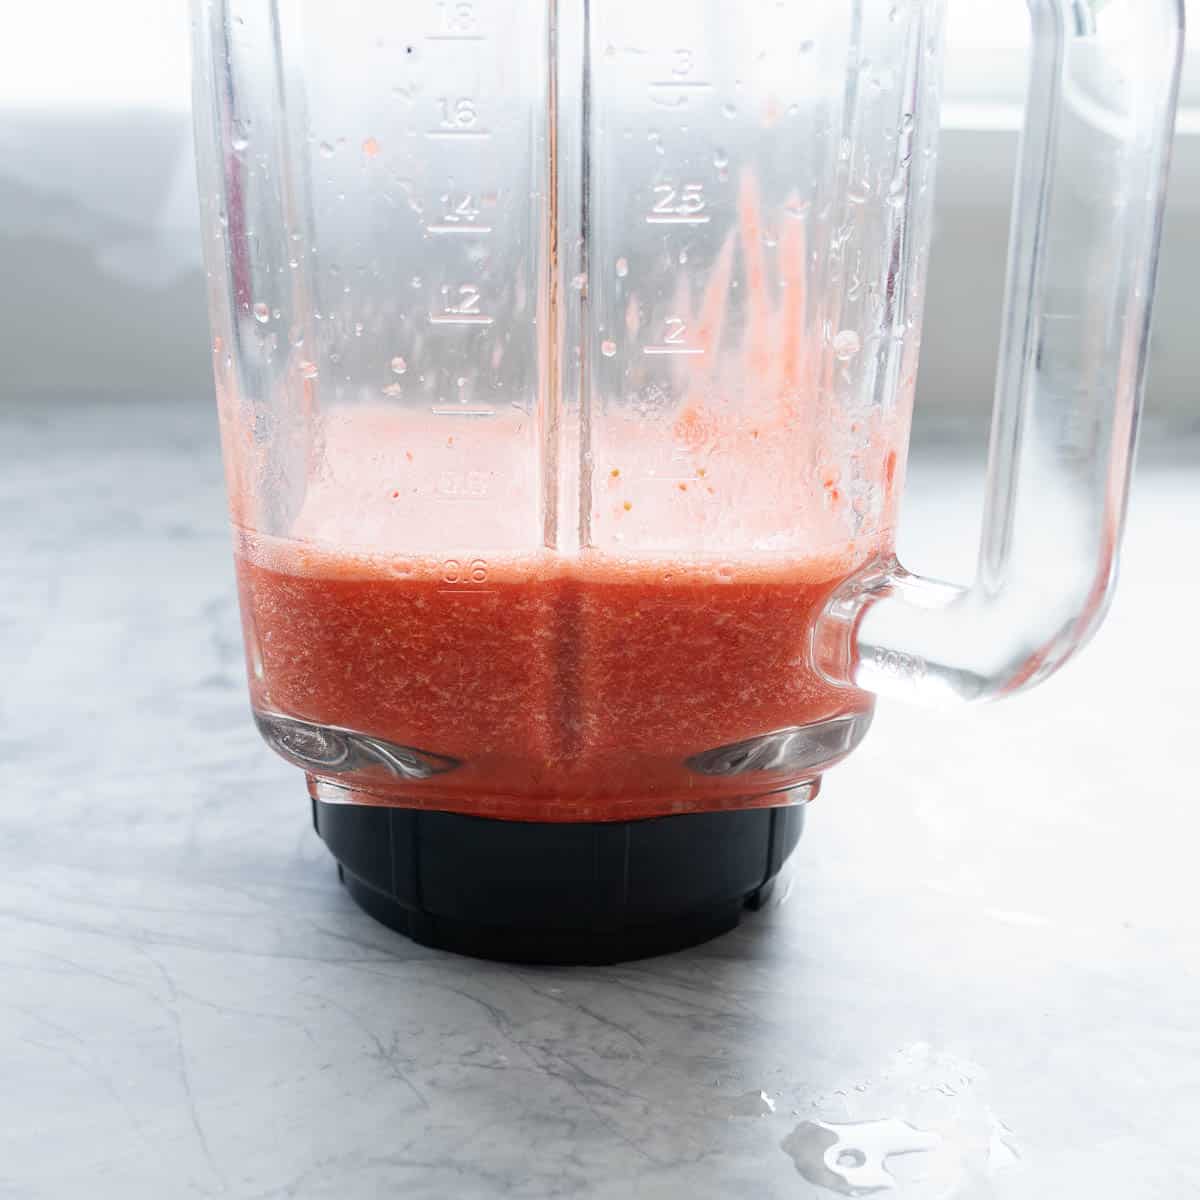 A blender jug of strawberry smoothie, a slightly chunky texture of strawberries visible. 